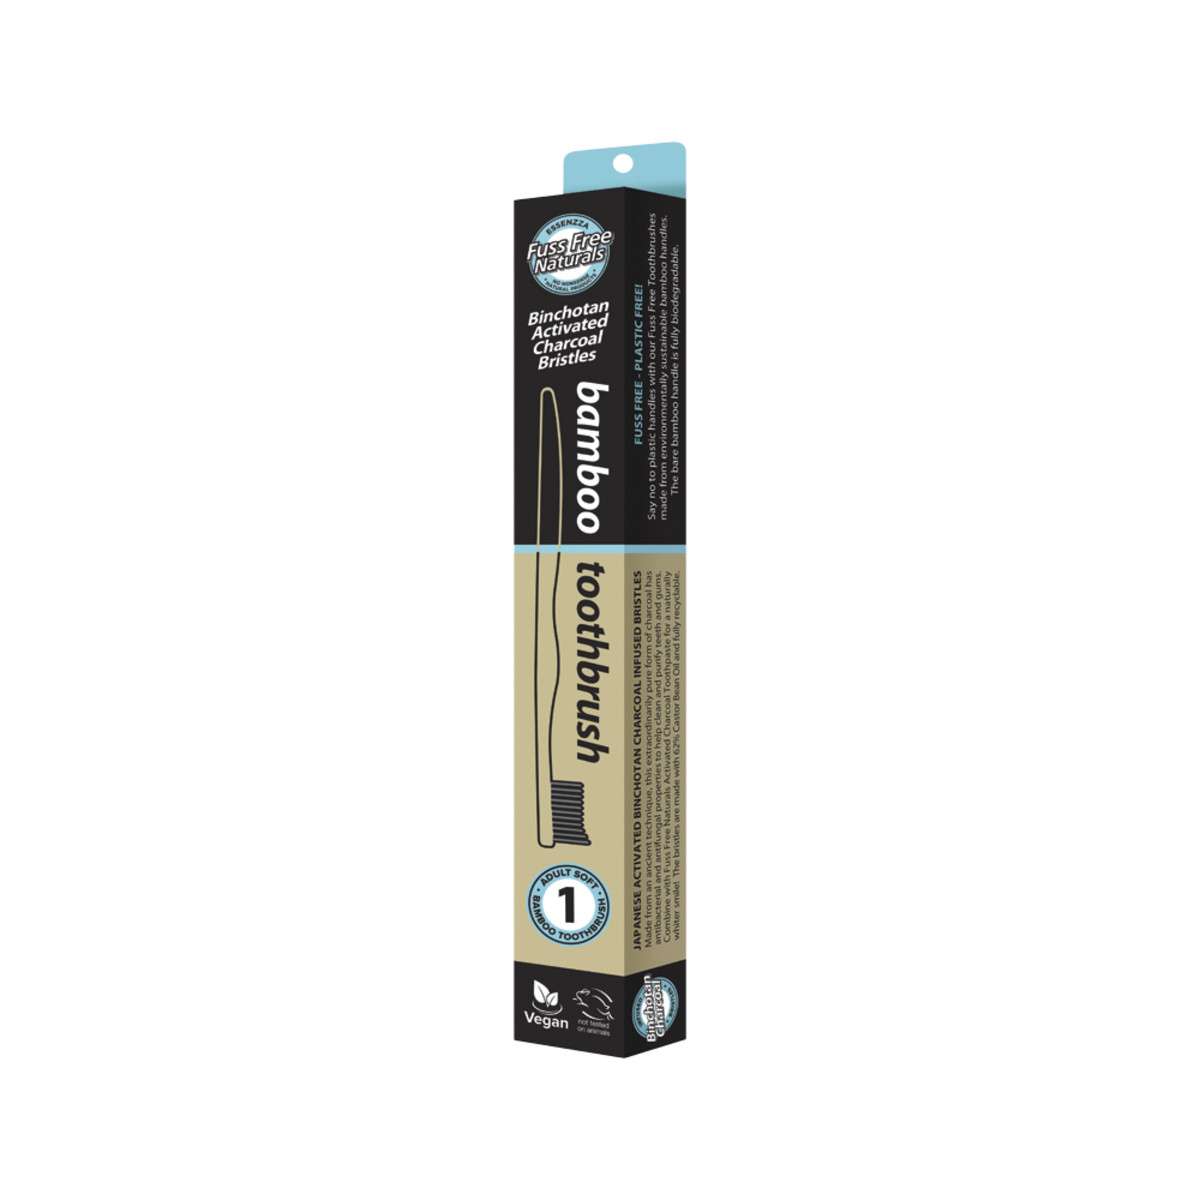 ESSENZZA FUSS FREE NATURALS - Toothbrush Bamboo Activated Charcoal Soft